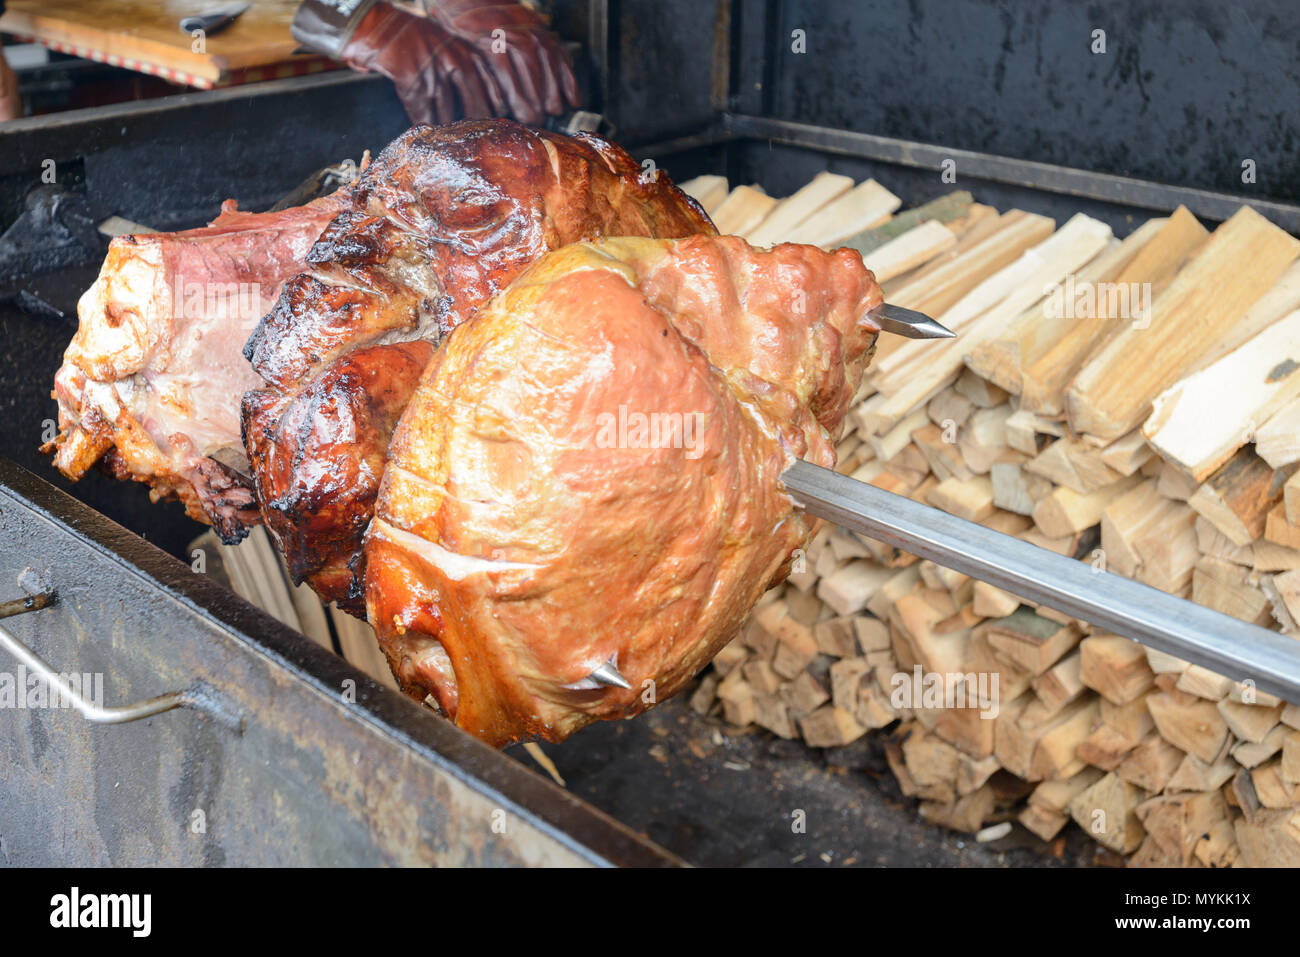 Prague Ham is traditionally served in restaurants and from street vendors with a side of boiled potatoes  and often accompanied by Czech beer. Stock Photo